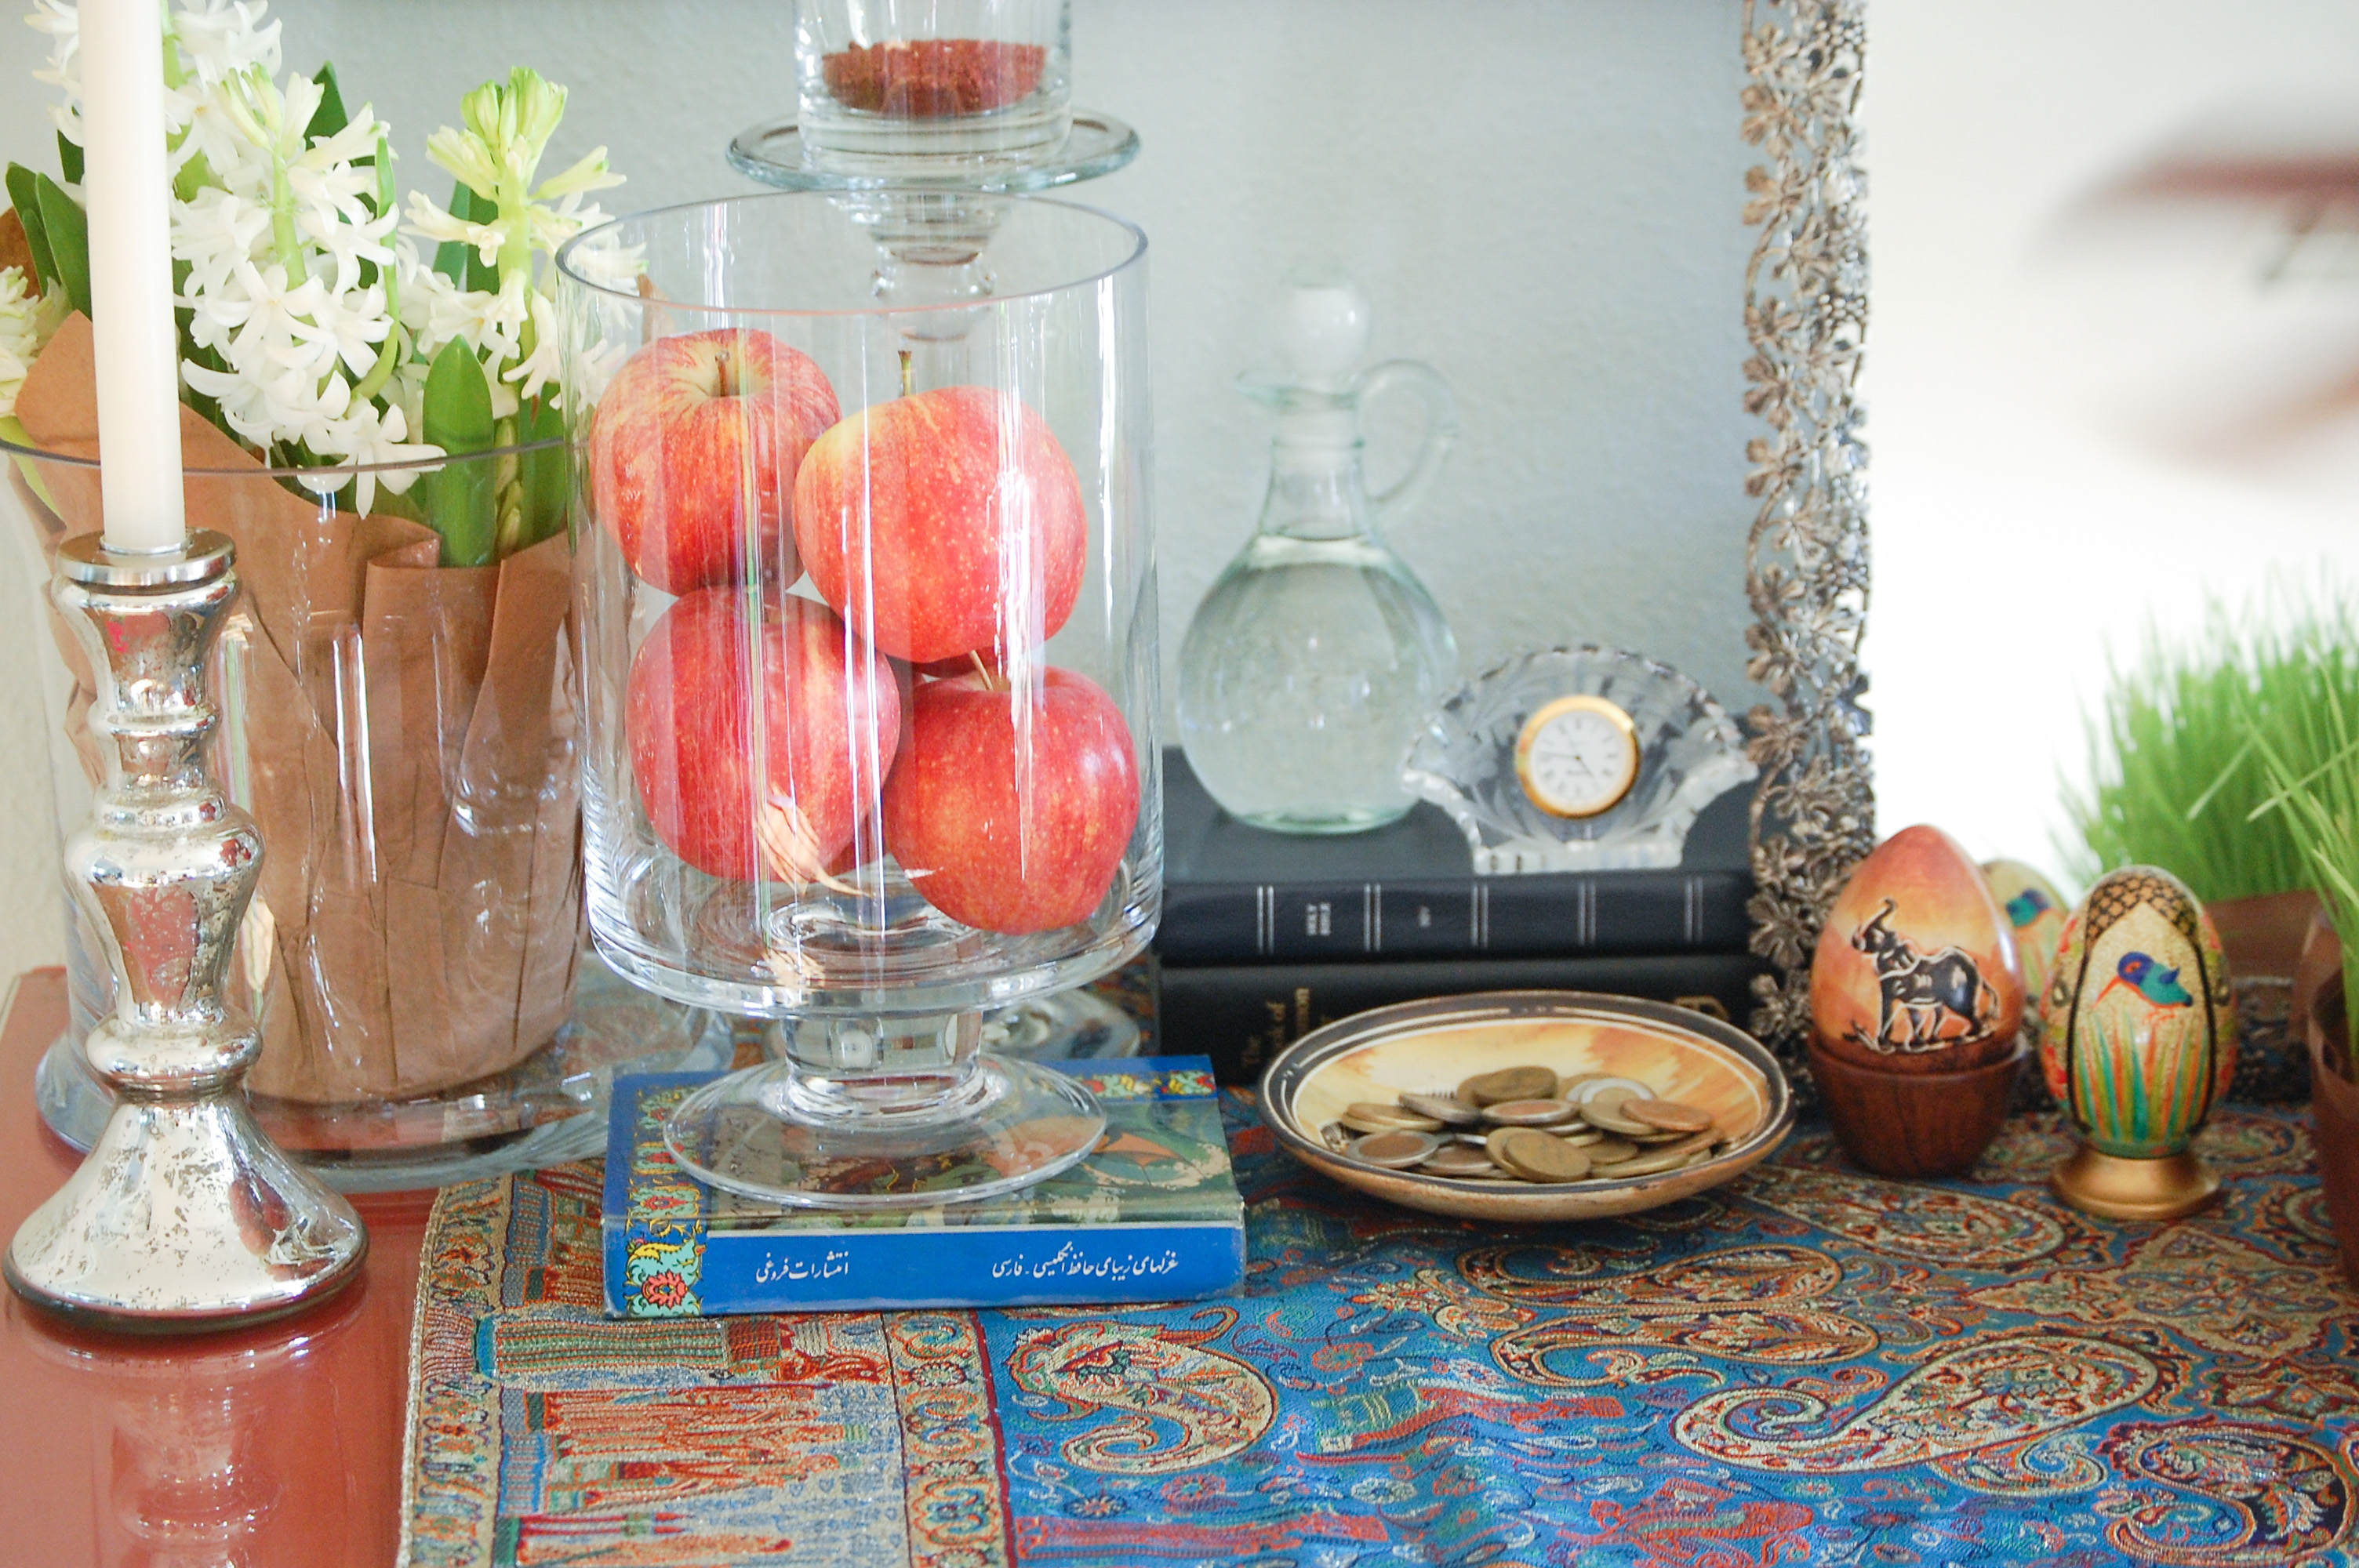 Celebrating The Persian New Year: Saba’s Favorite Nowruz Traditions